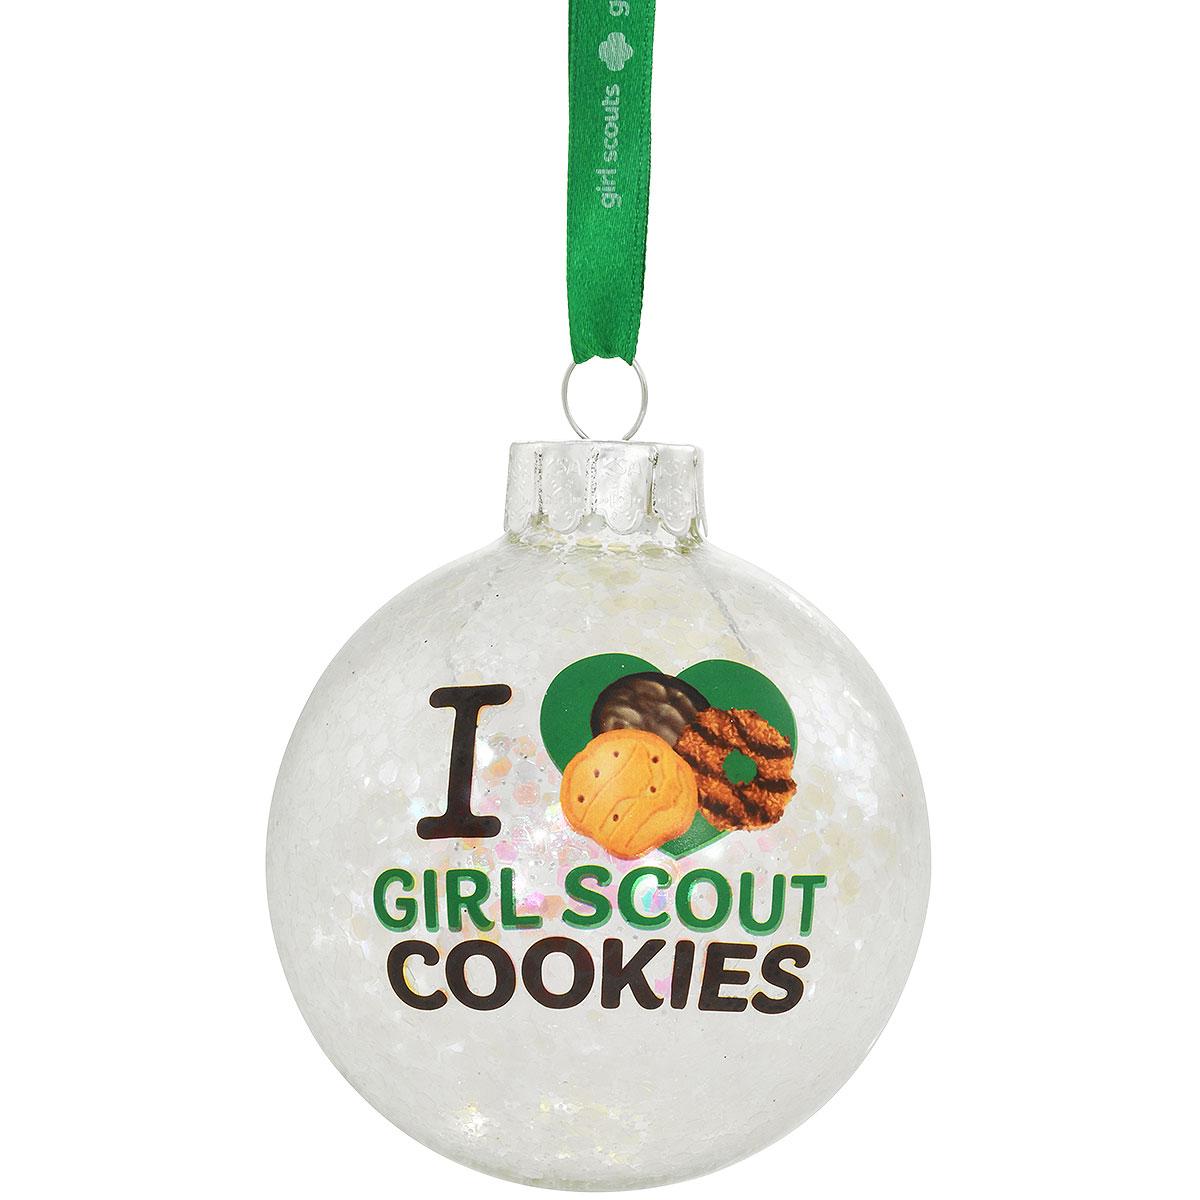 Girl Scout Cookies Glass Ornament